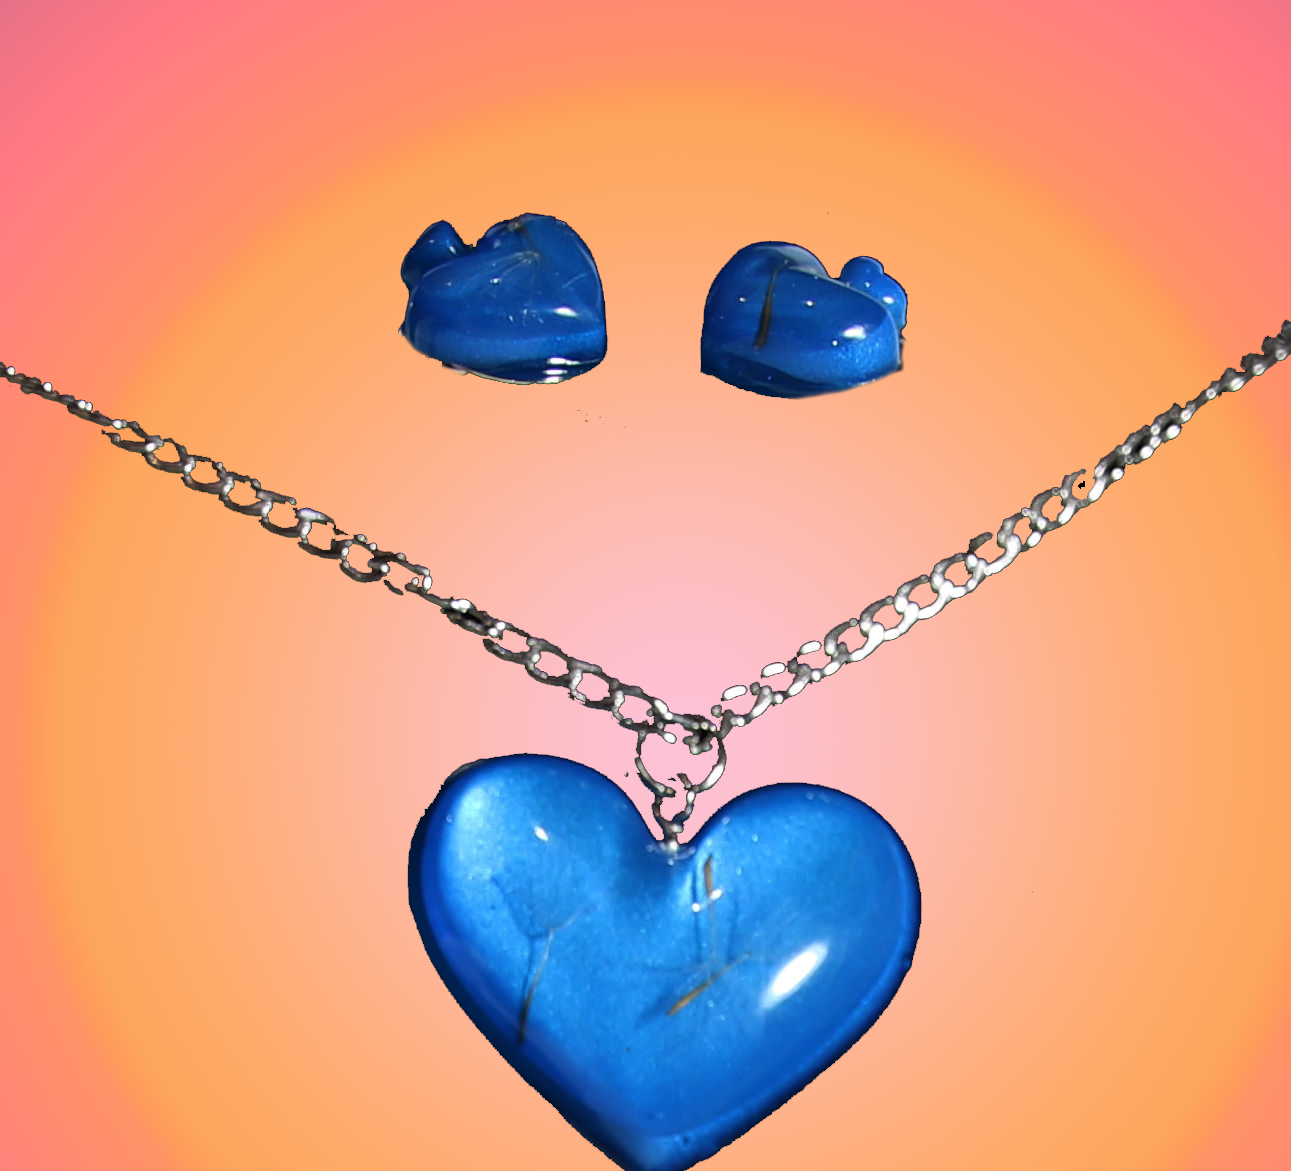 Blue heart Pendant with Real Dandelion Seeds and Matching Clip-on Earring set